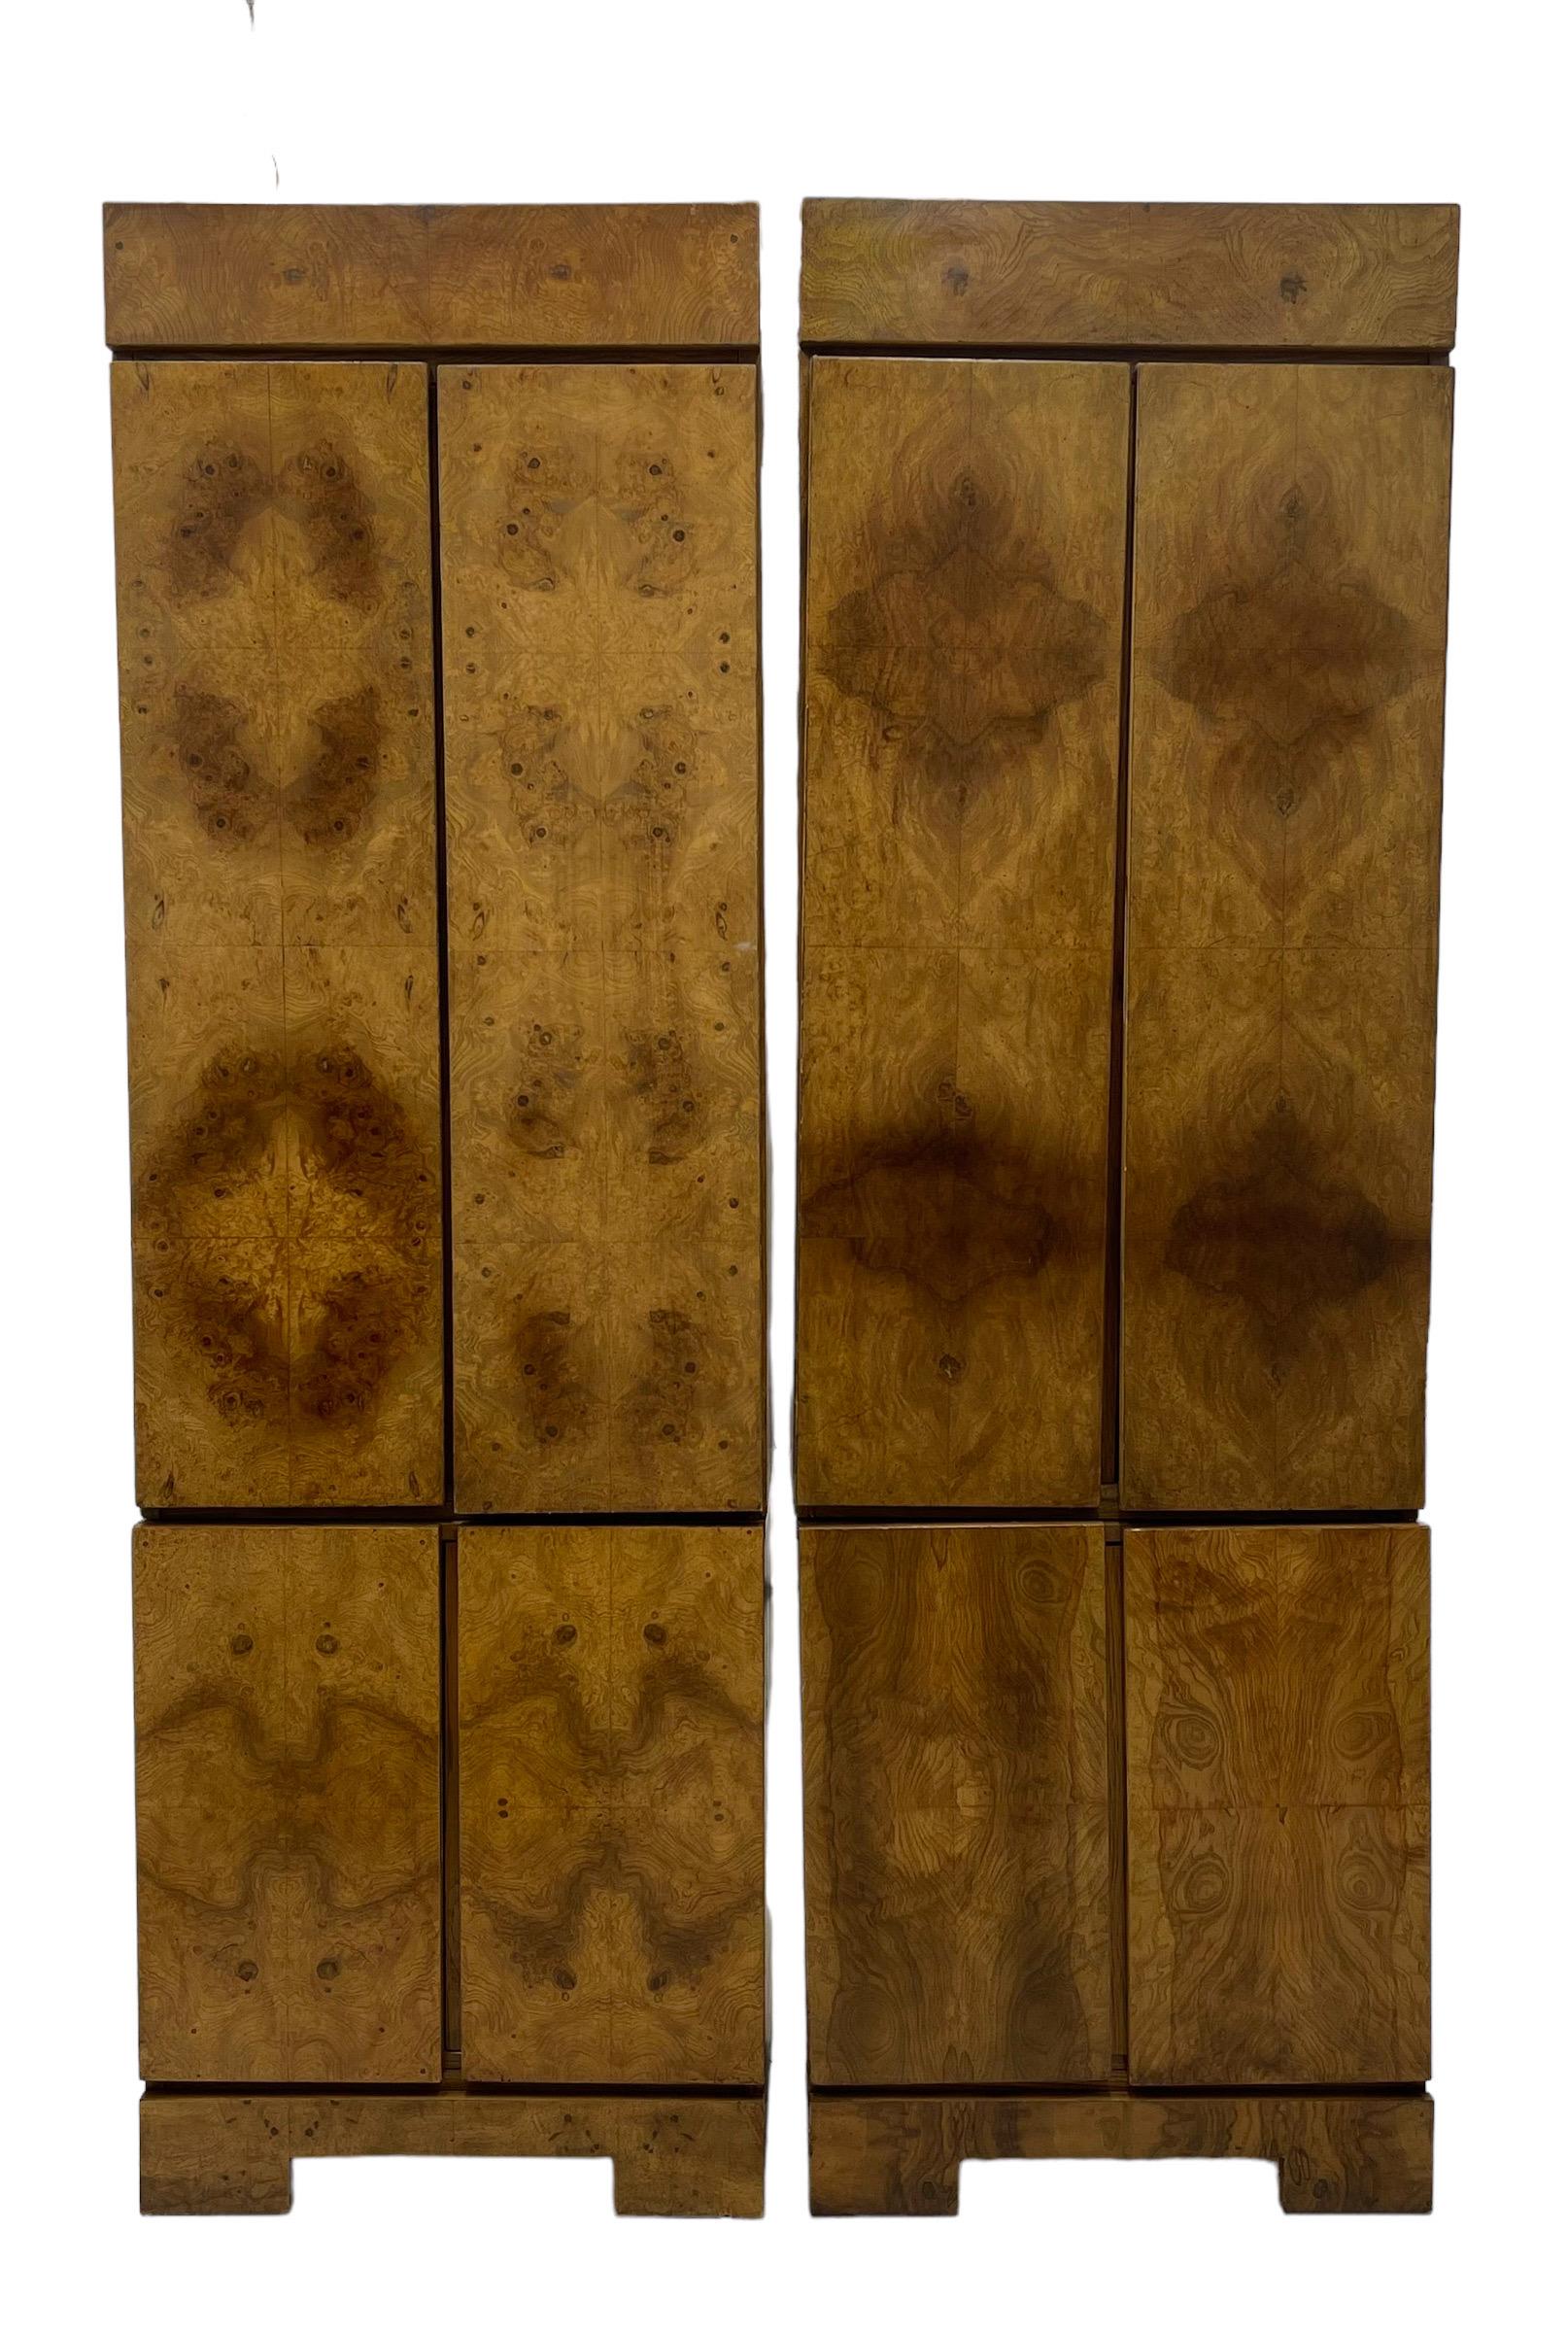 Vintage Mid Century Modern Armoire or Storage Cabinet Set in Olive Burl by Milo Baughman

Dimensions. 52 W ; 18 1/8 D ; 82 H